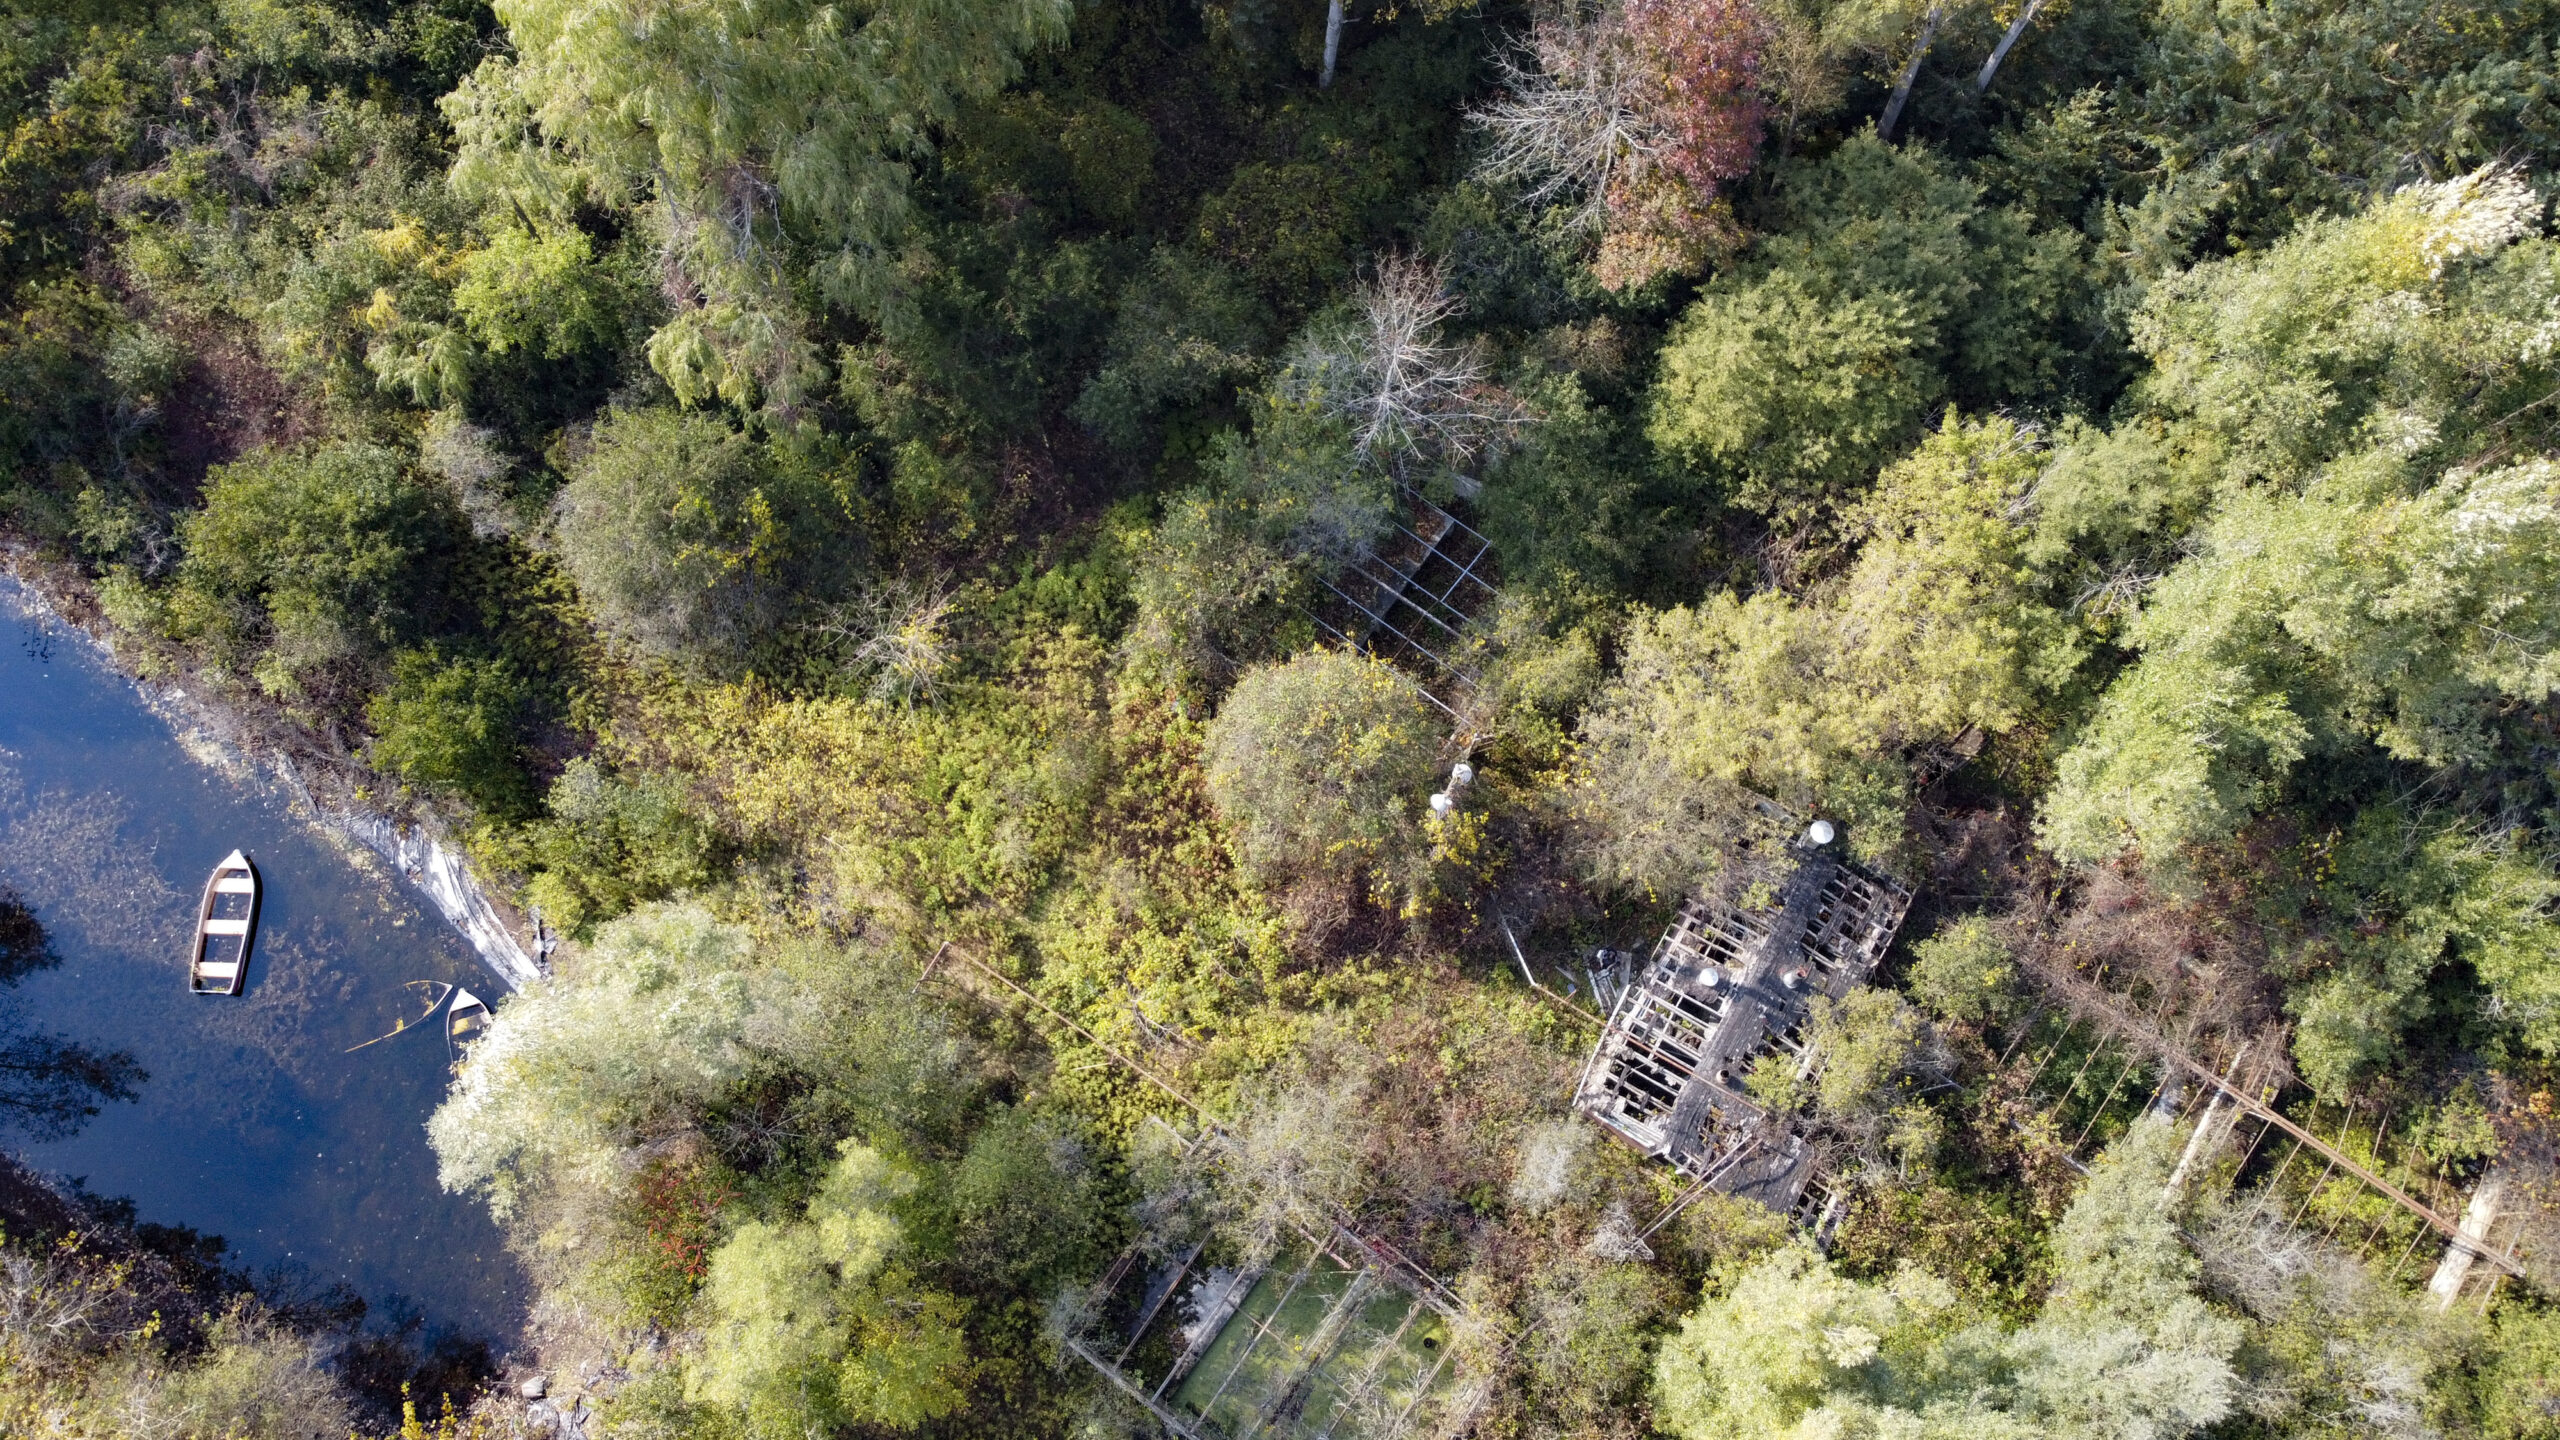 bird's eye view of an abandoned research site in the forest